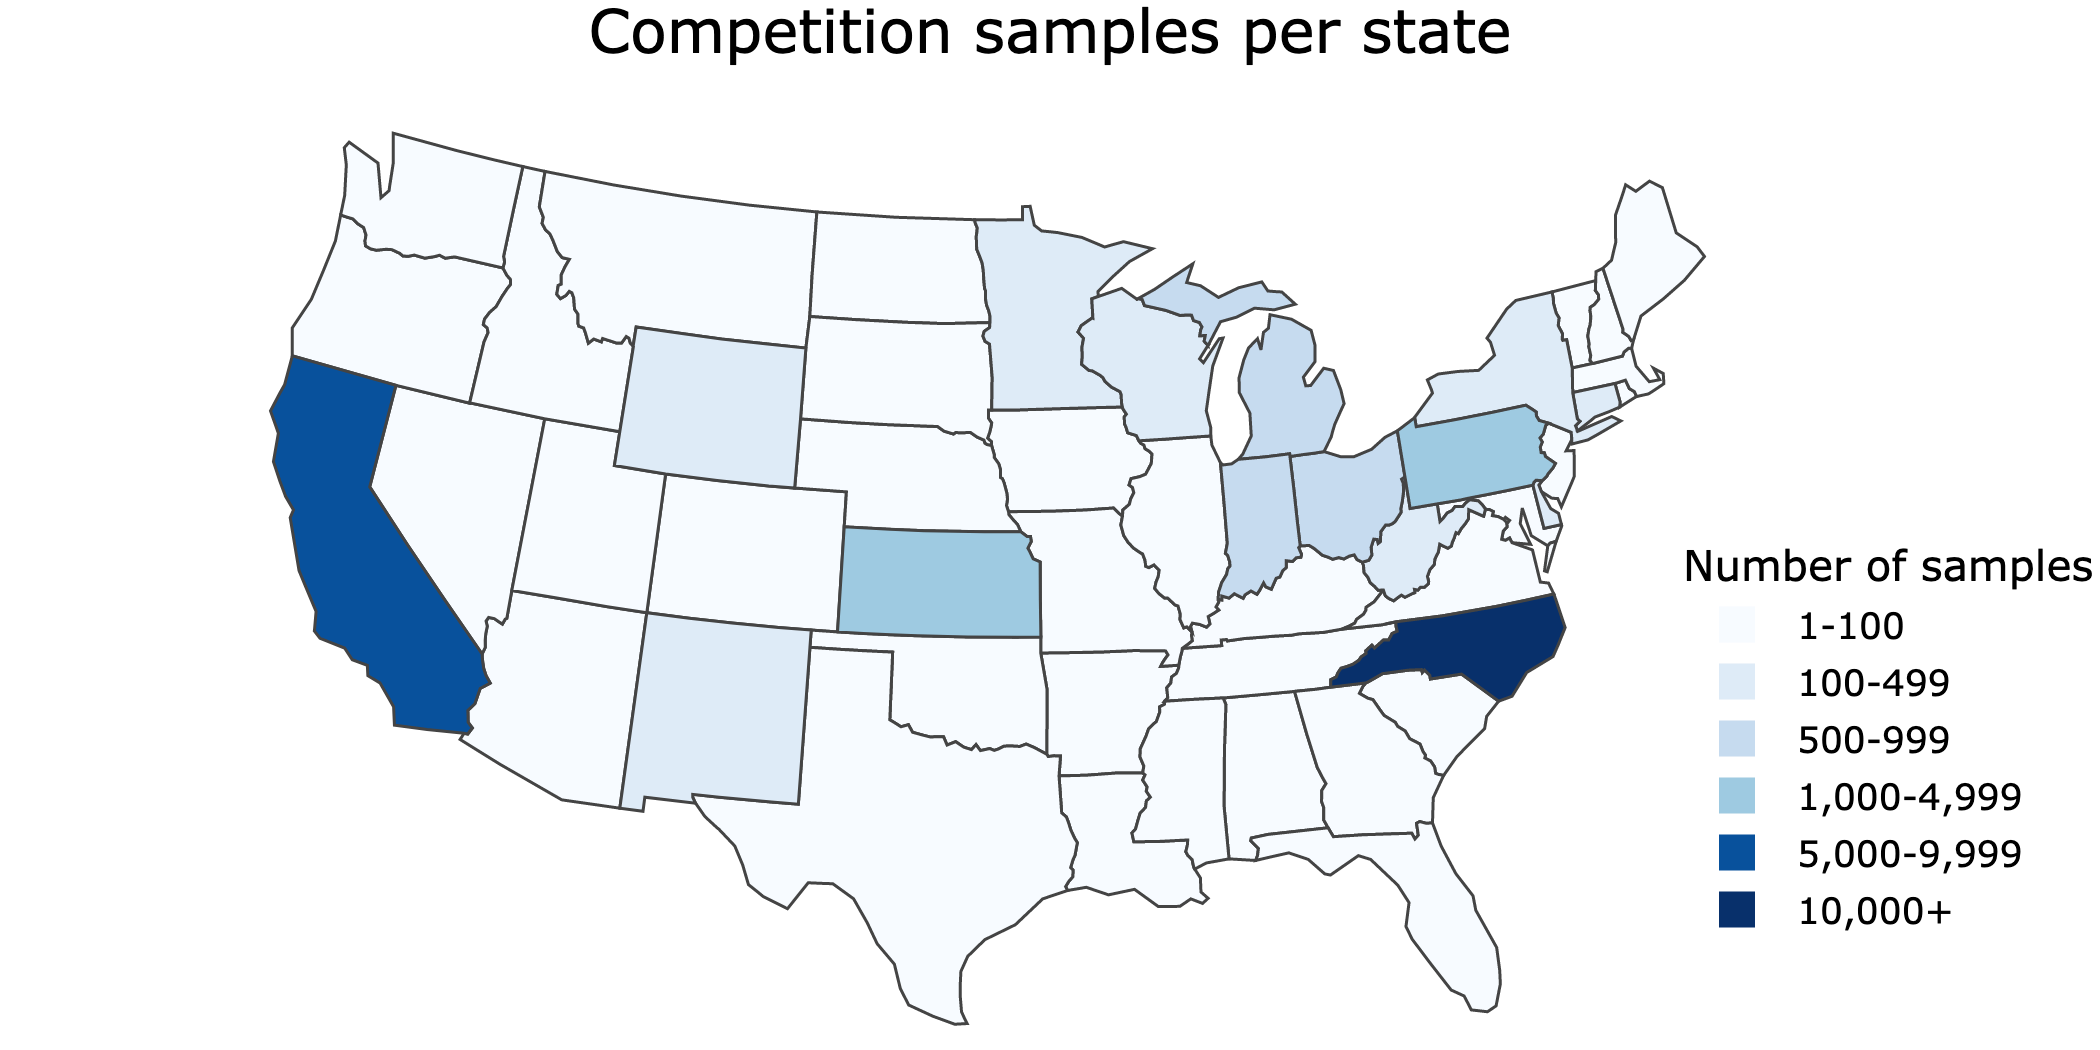 Map showing the number of samples per state. Most states had fewer than 500 data points, while CA had over 5,000 and NC had over 10,000.